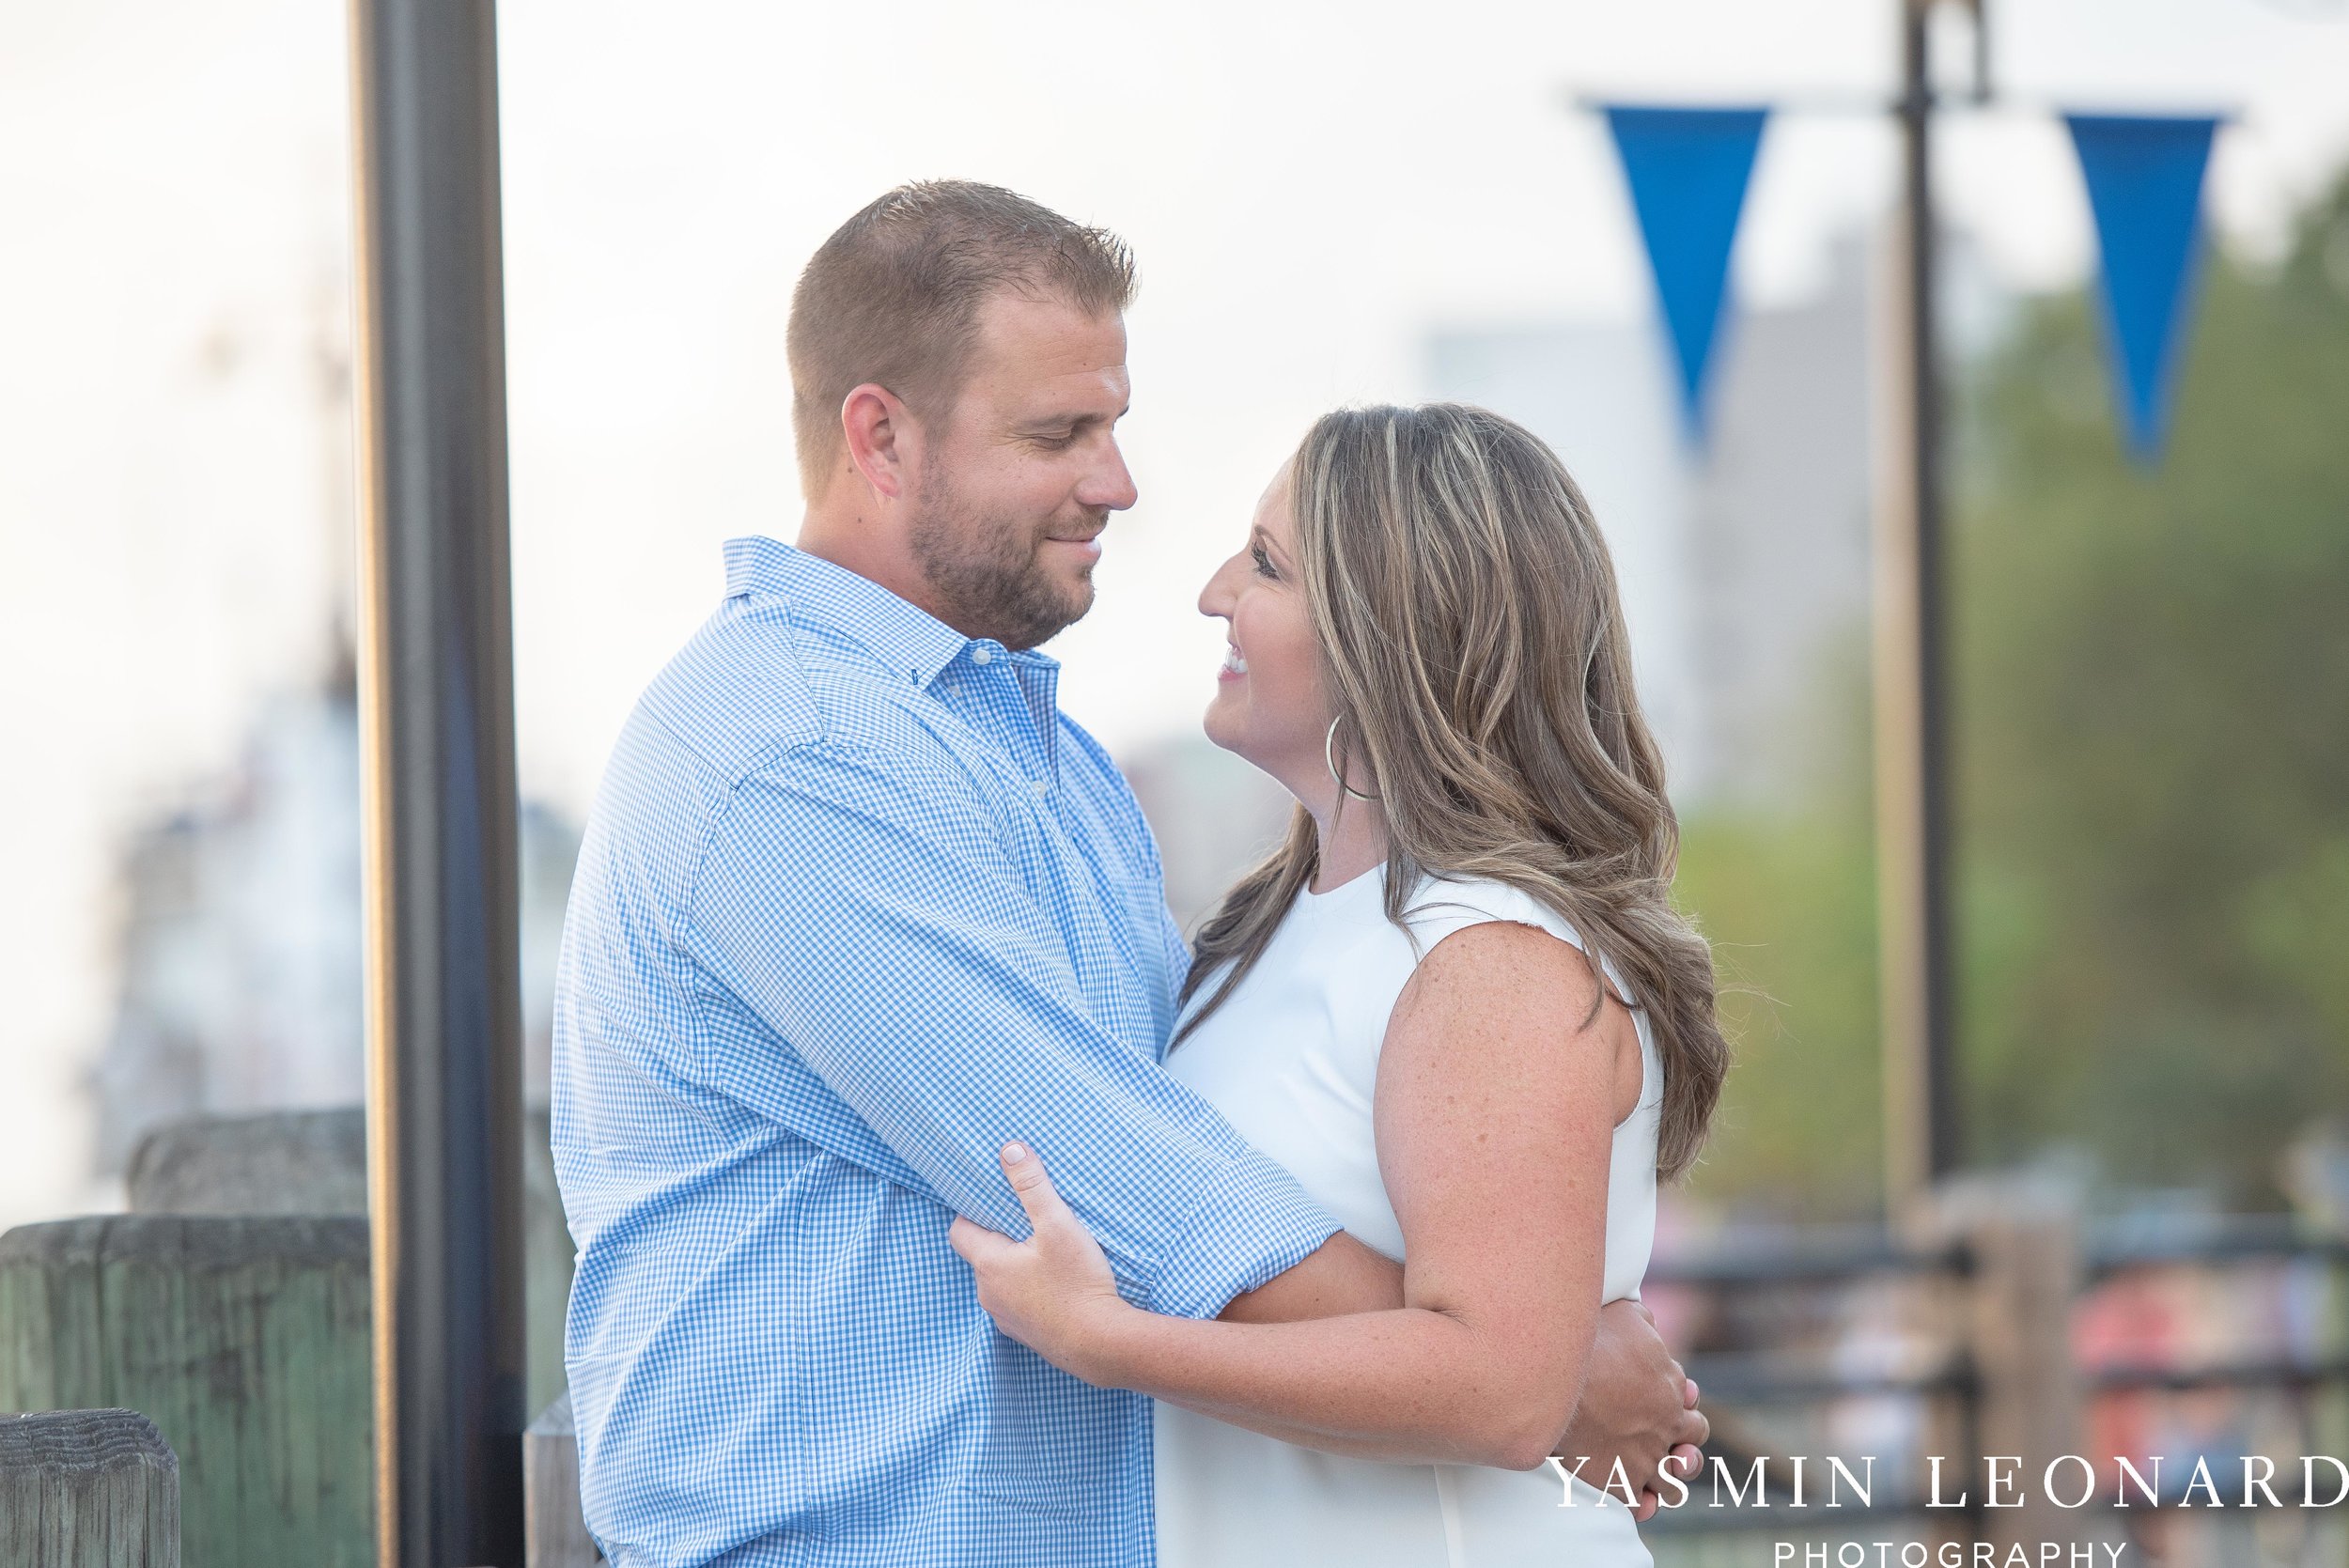 Wrightsville Beach Engagement Session - Wilmington Engagement Session - Downtown Wilmington Engagement Session - NC Weddings - Wilmington NC - Yasmin Leonard Photography-2.jpg